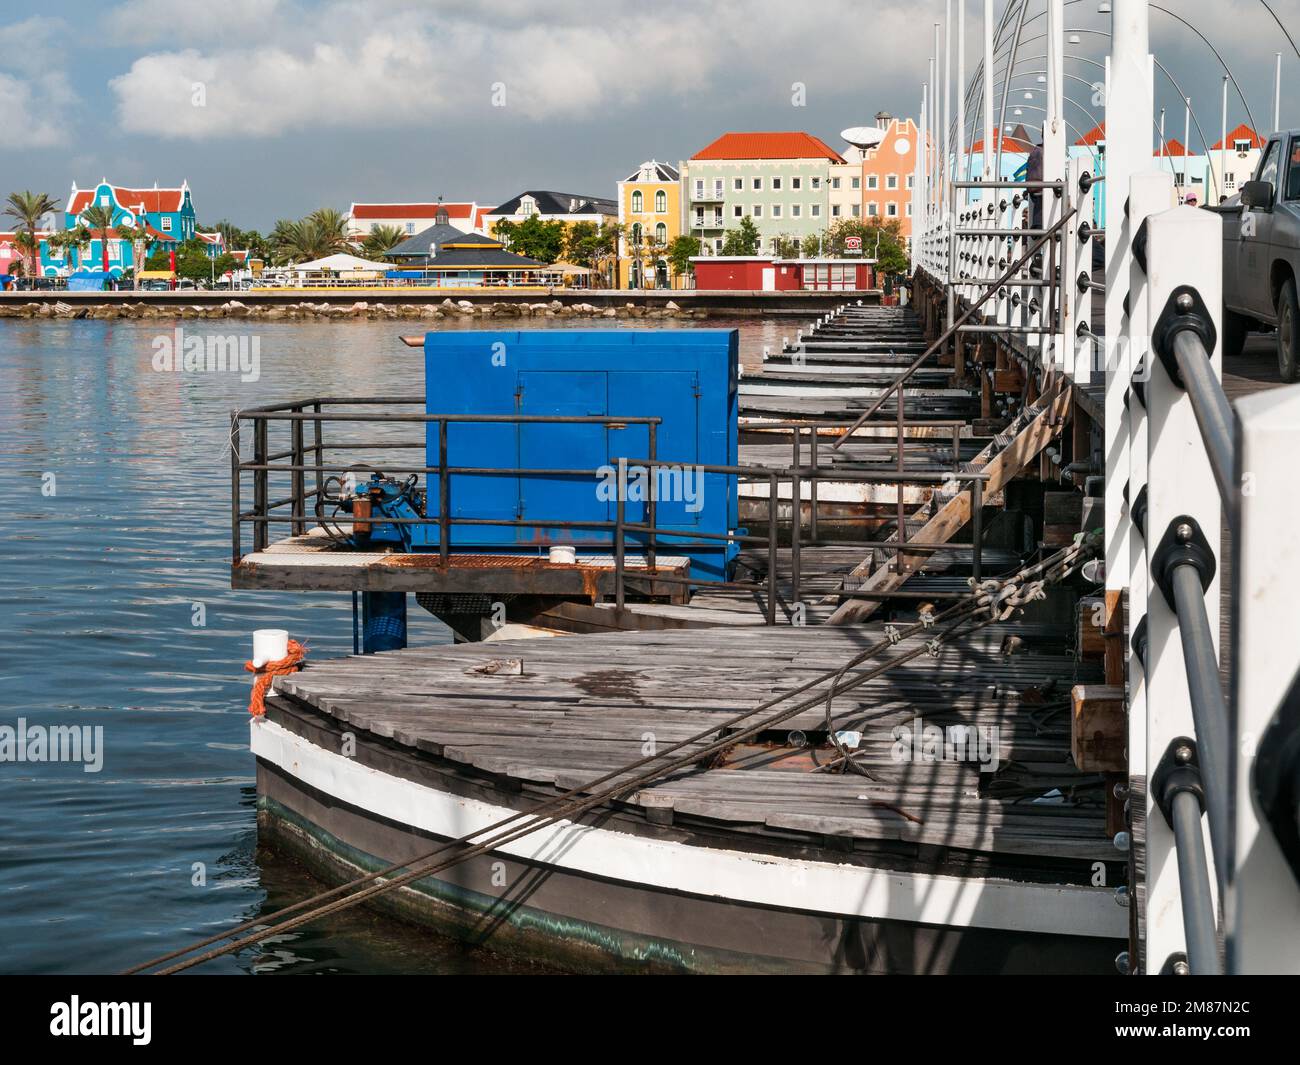 WILLEMSTAD, CURACAO - NOVEMBER 21, 2008: The pontoons of the Queen Emma Bridge in the town centre of Willemstad in Curacao with the colorful houses on Stock Photo